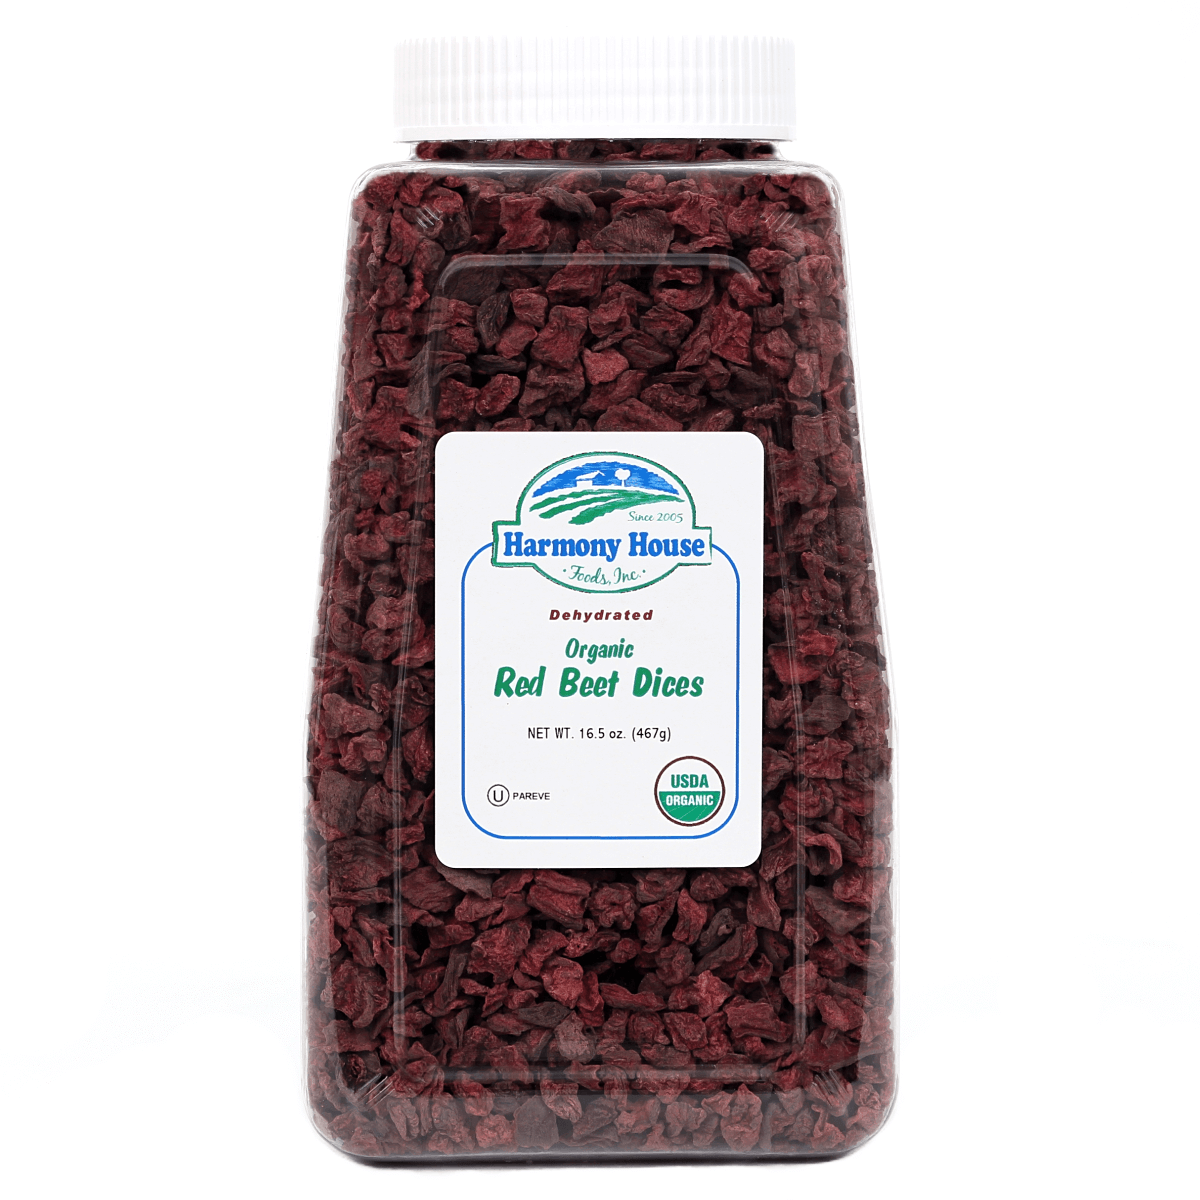 A jar of Harmony House Organic Dried Red Beet Dices on a white background.